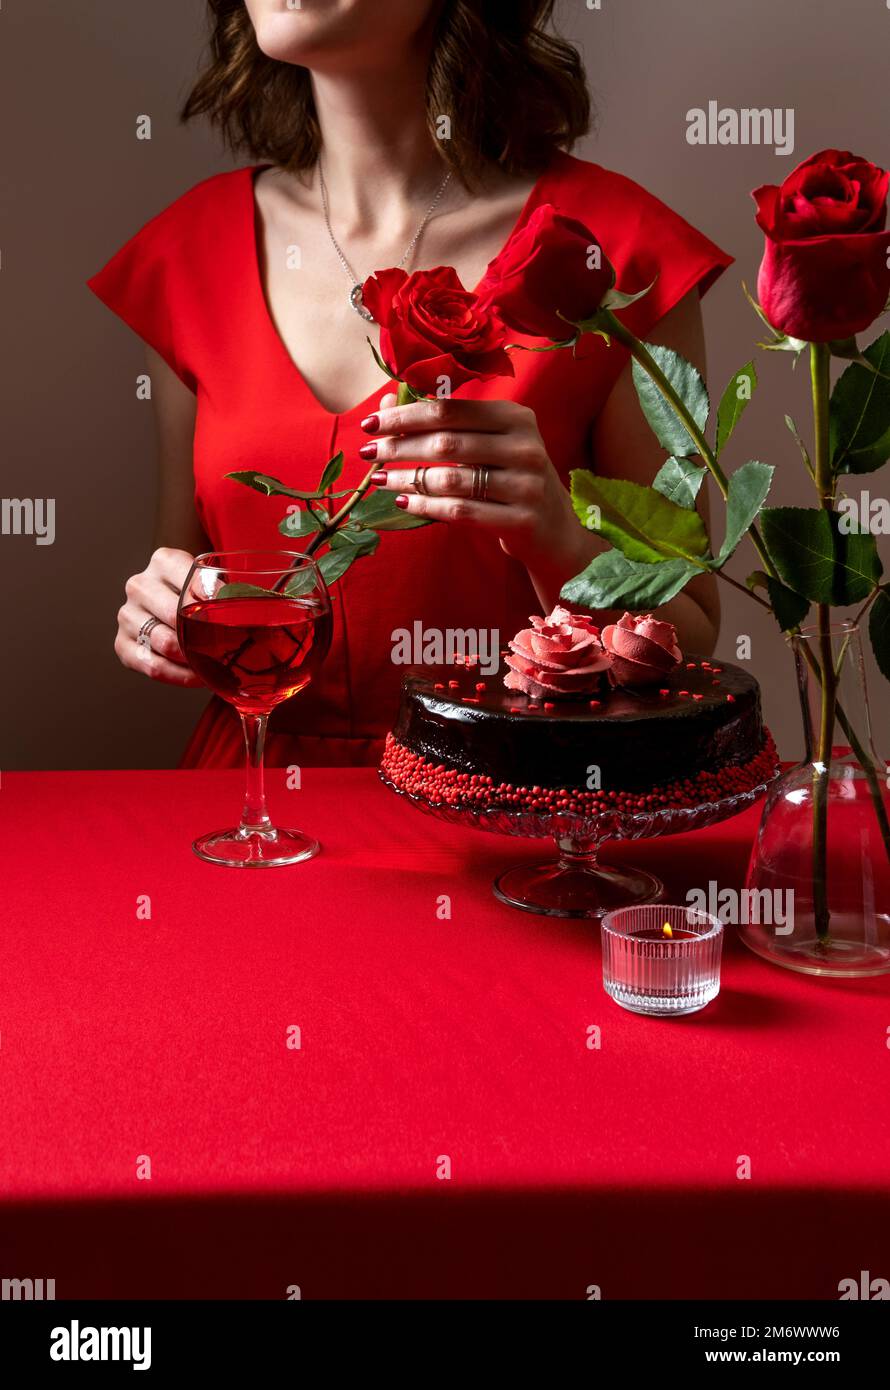 Woman in red dress hand holding a red rose. Romantic candlelight dinner. Valentine's Day. Festive table setting for valentine's Stock Photo